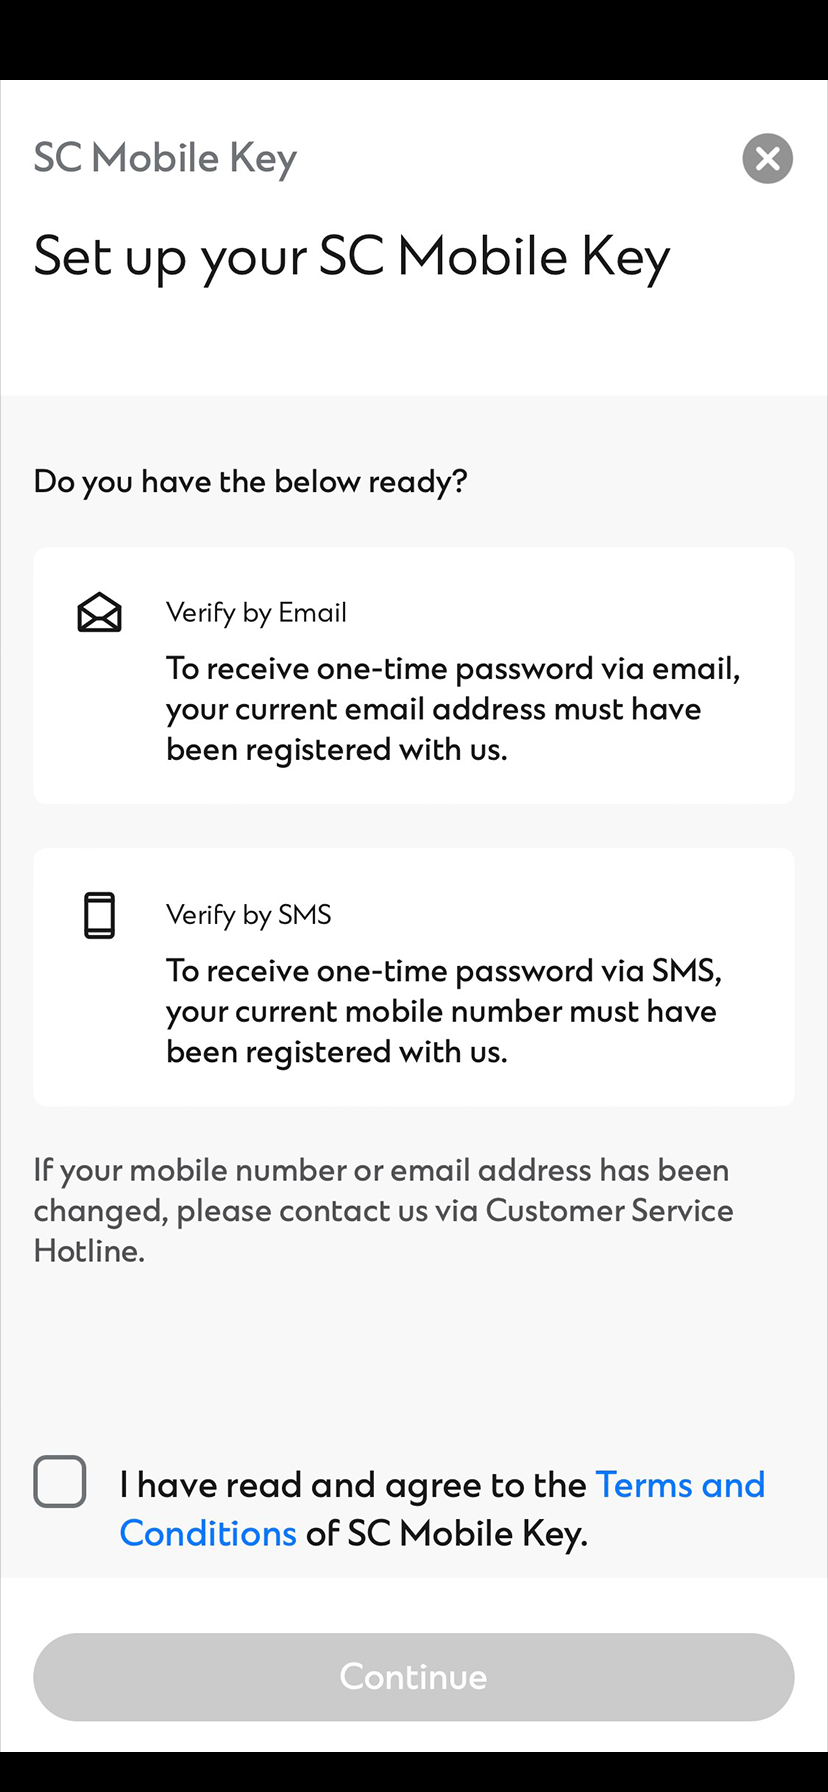 New to SC Mobile on Activate Push Notification in one go during SC Mobile Key registration Step 1